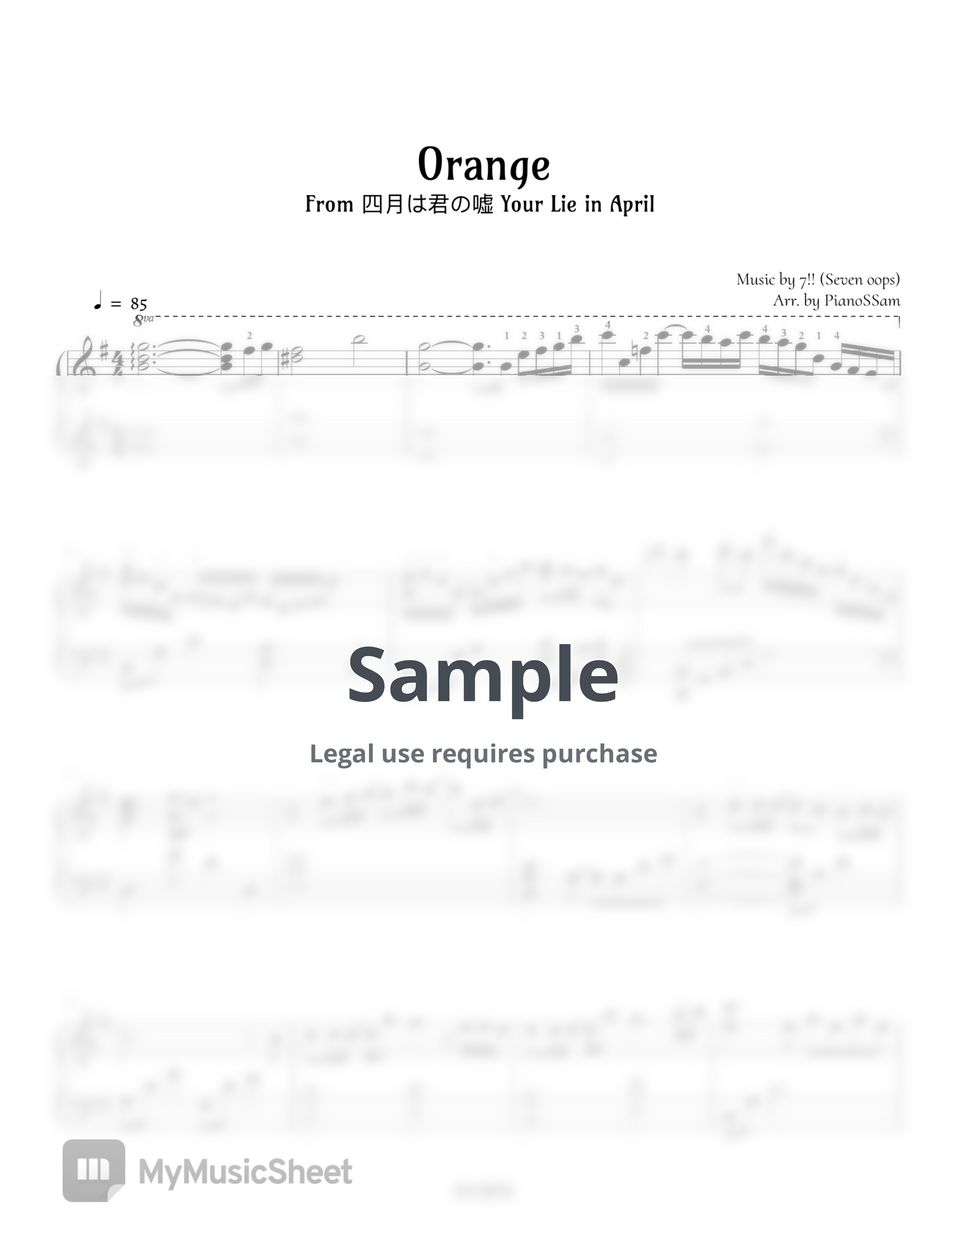 Your lie in April - Orange by PianoSSam